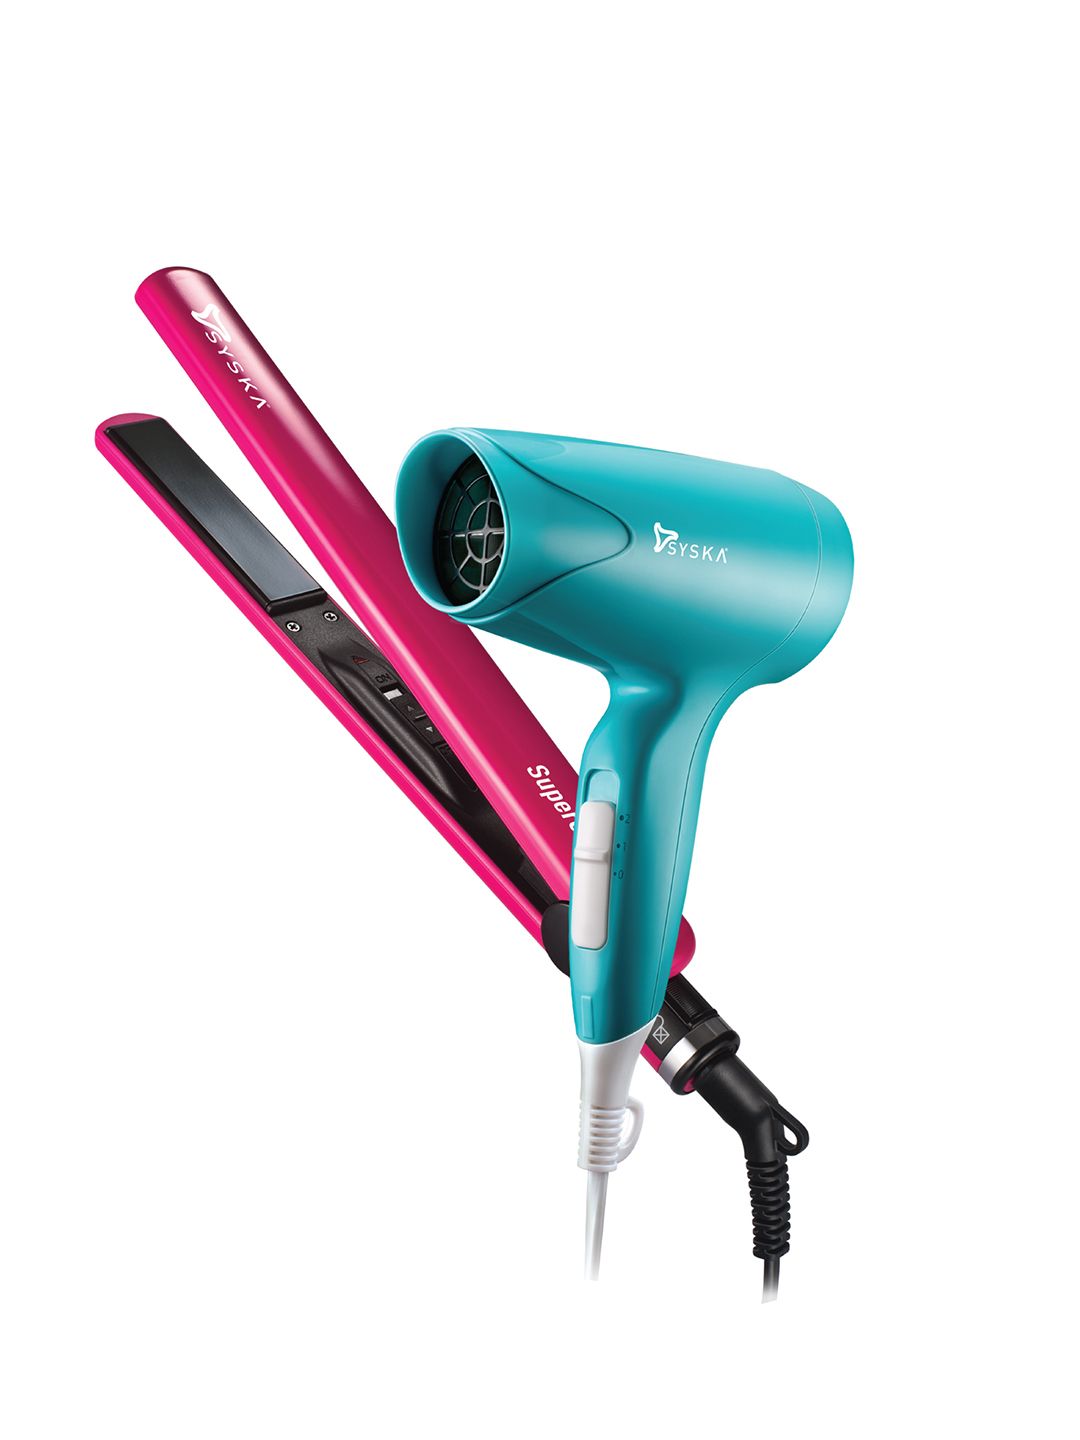 SYSKA Set of Hair Dryer and Hair Straightener CPF6800 Price in India